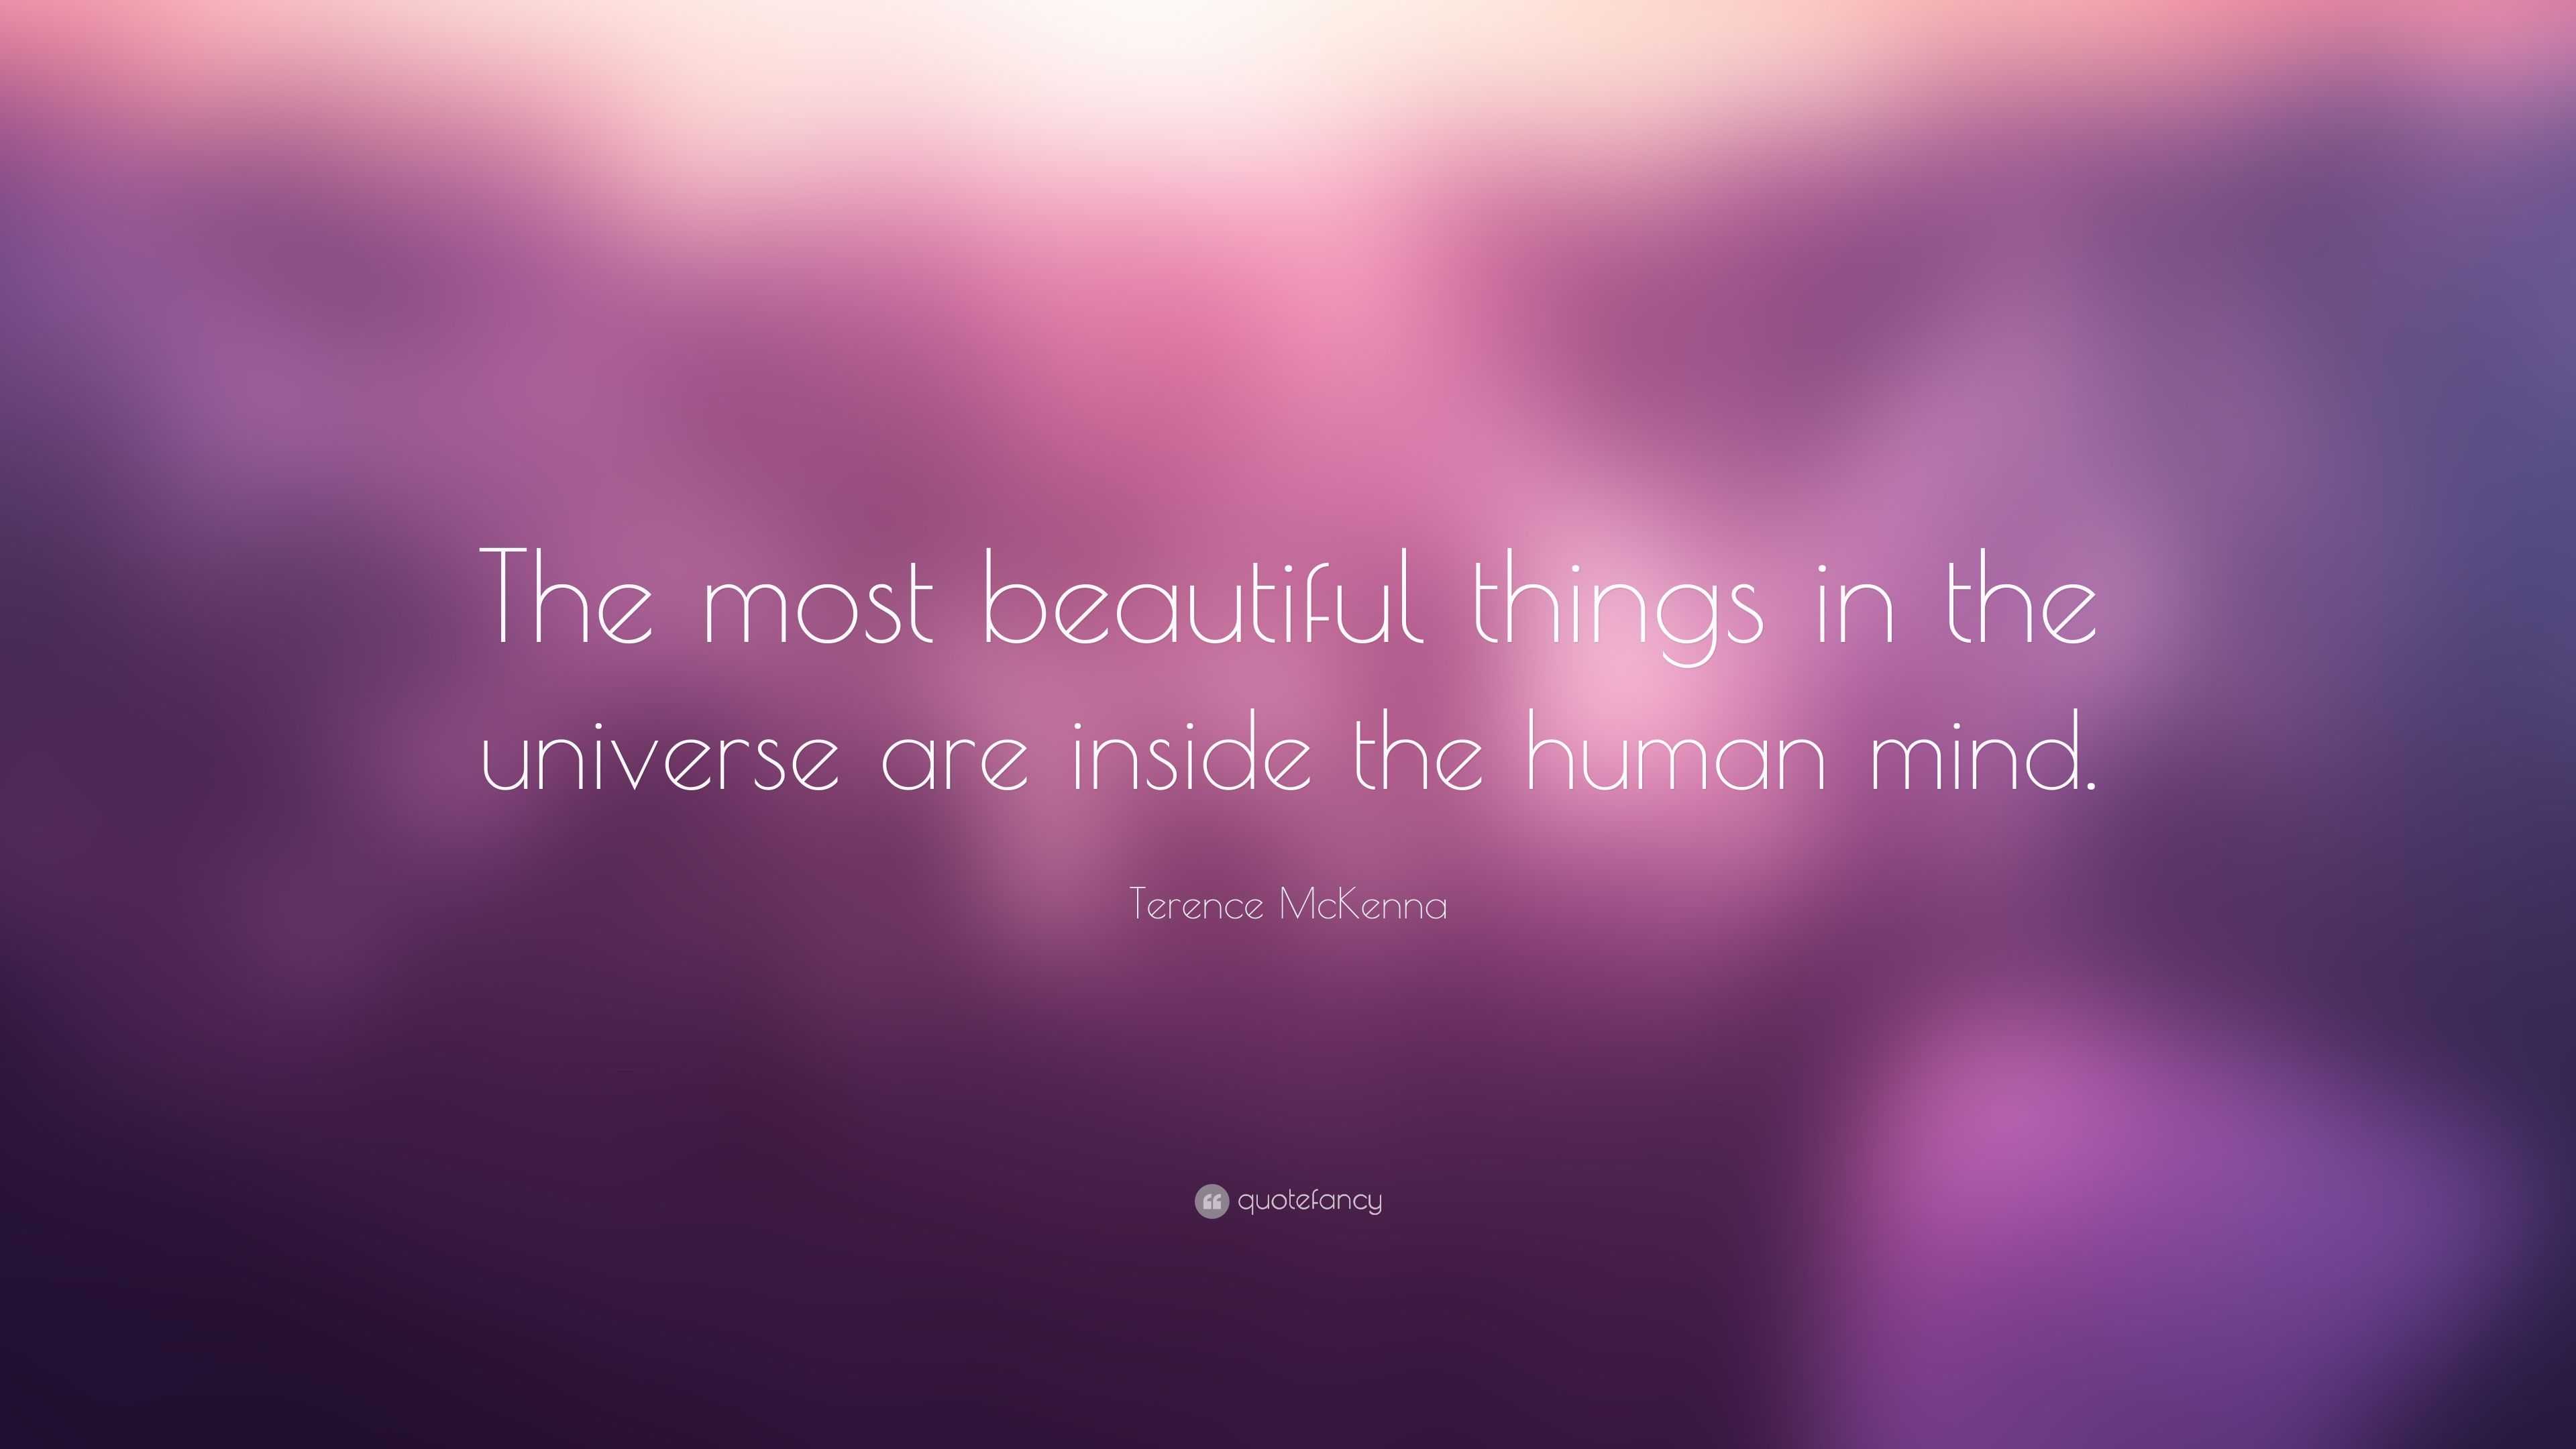 Terence McKenna Quote: “The most beautiful things in the universe are ...